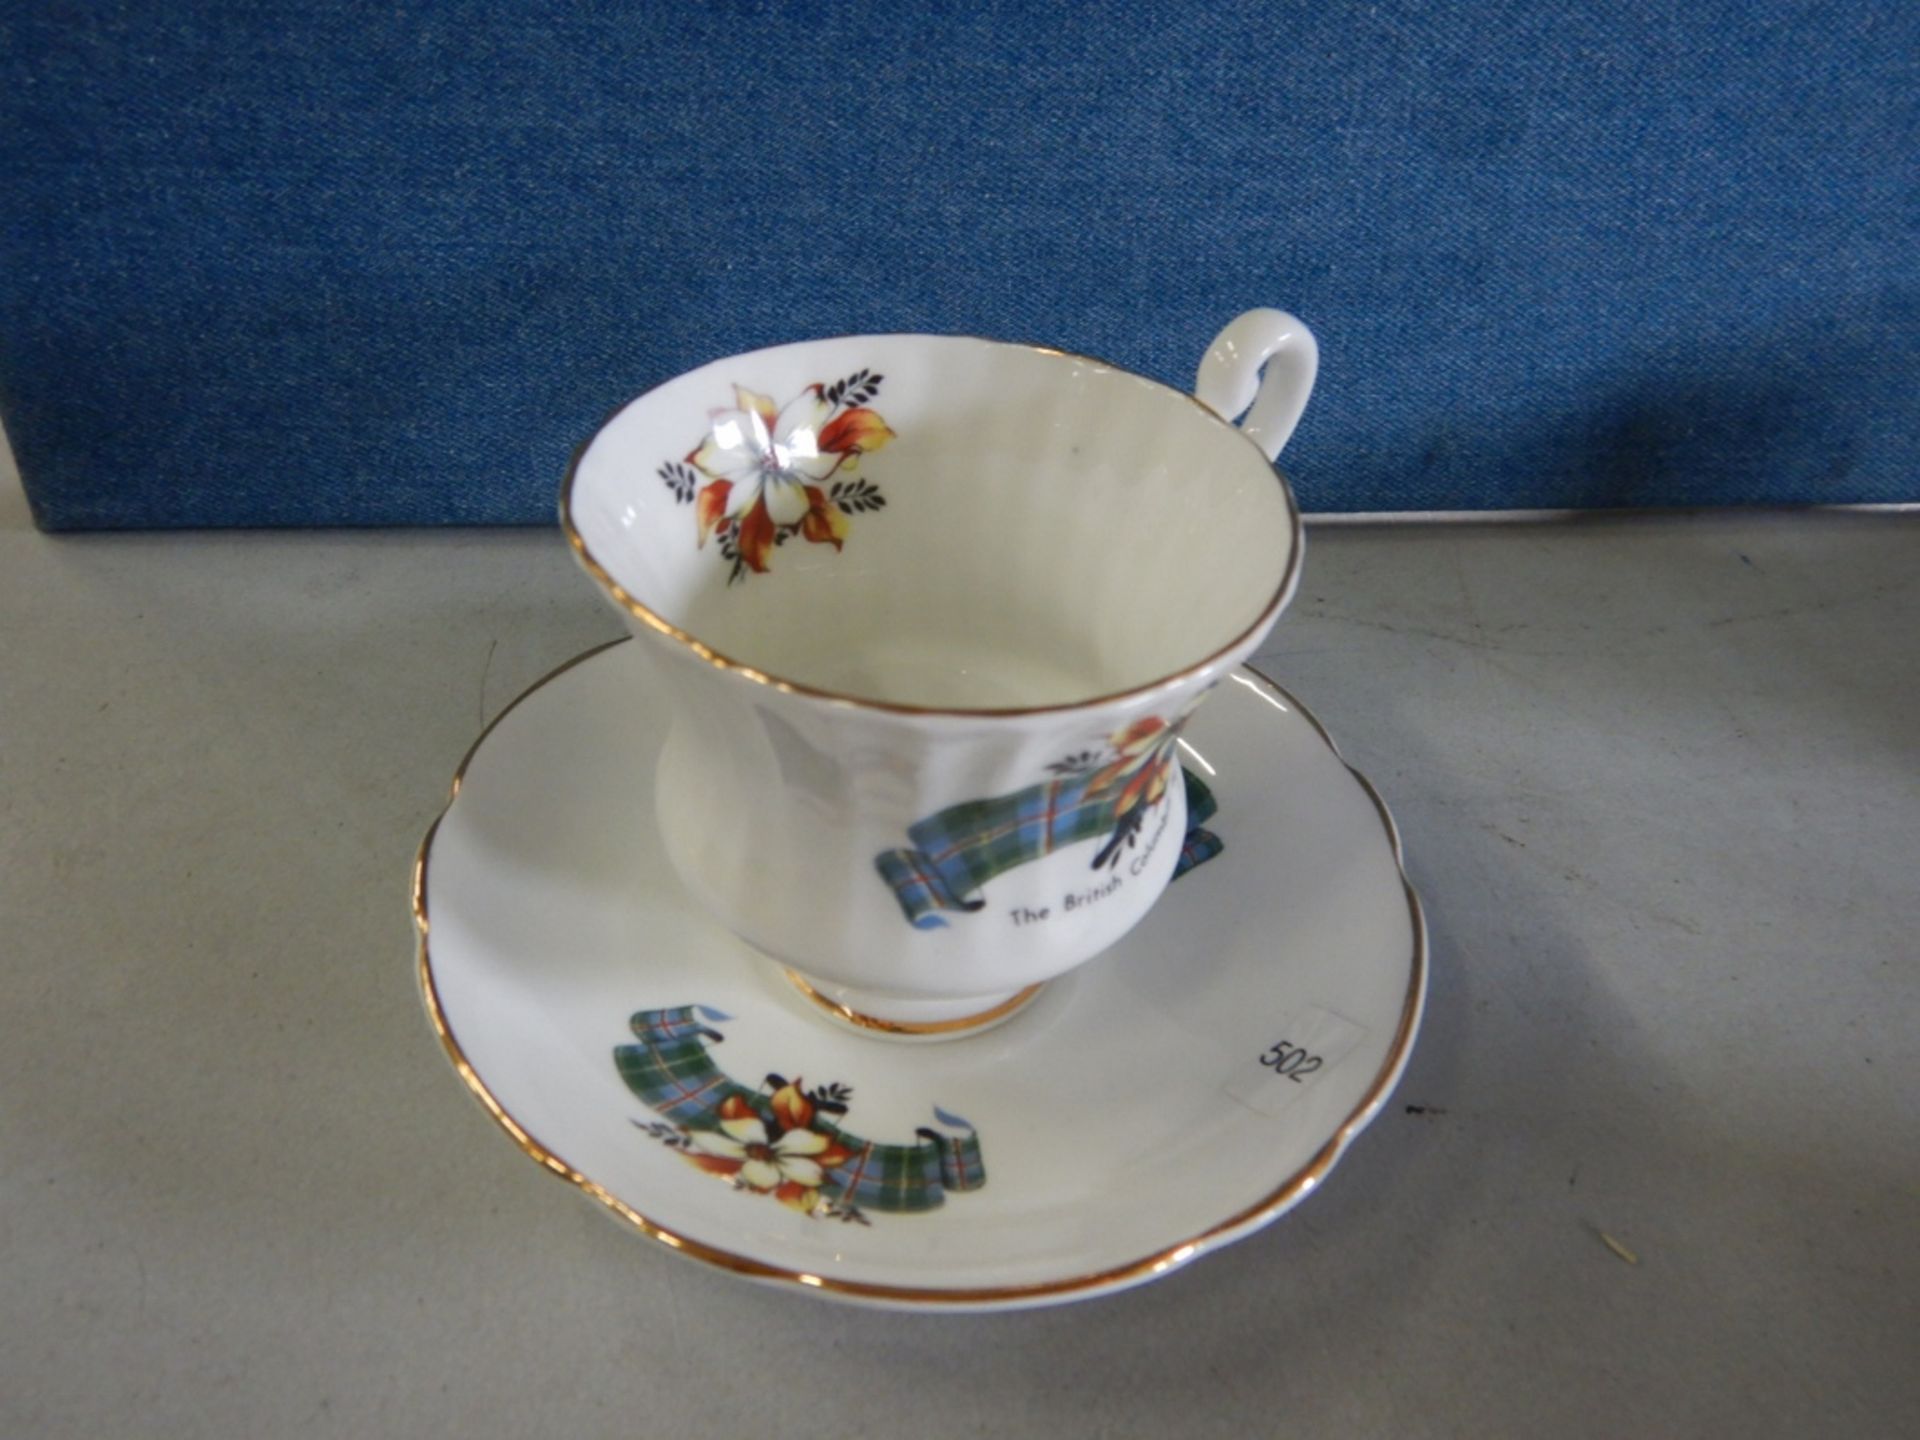 ANTIQUE TEACUPS & SAUCERS - MADE IN ENGLAND - LOT OF 3 - FINE BONE CHINA "PRINCE EDWARD ISLAND" - - Image 6 of 15